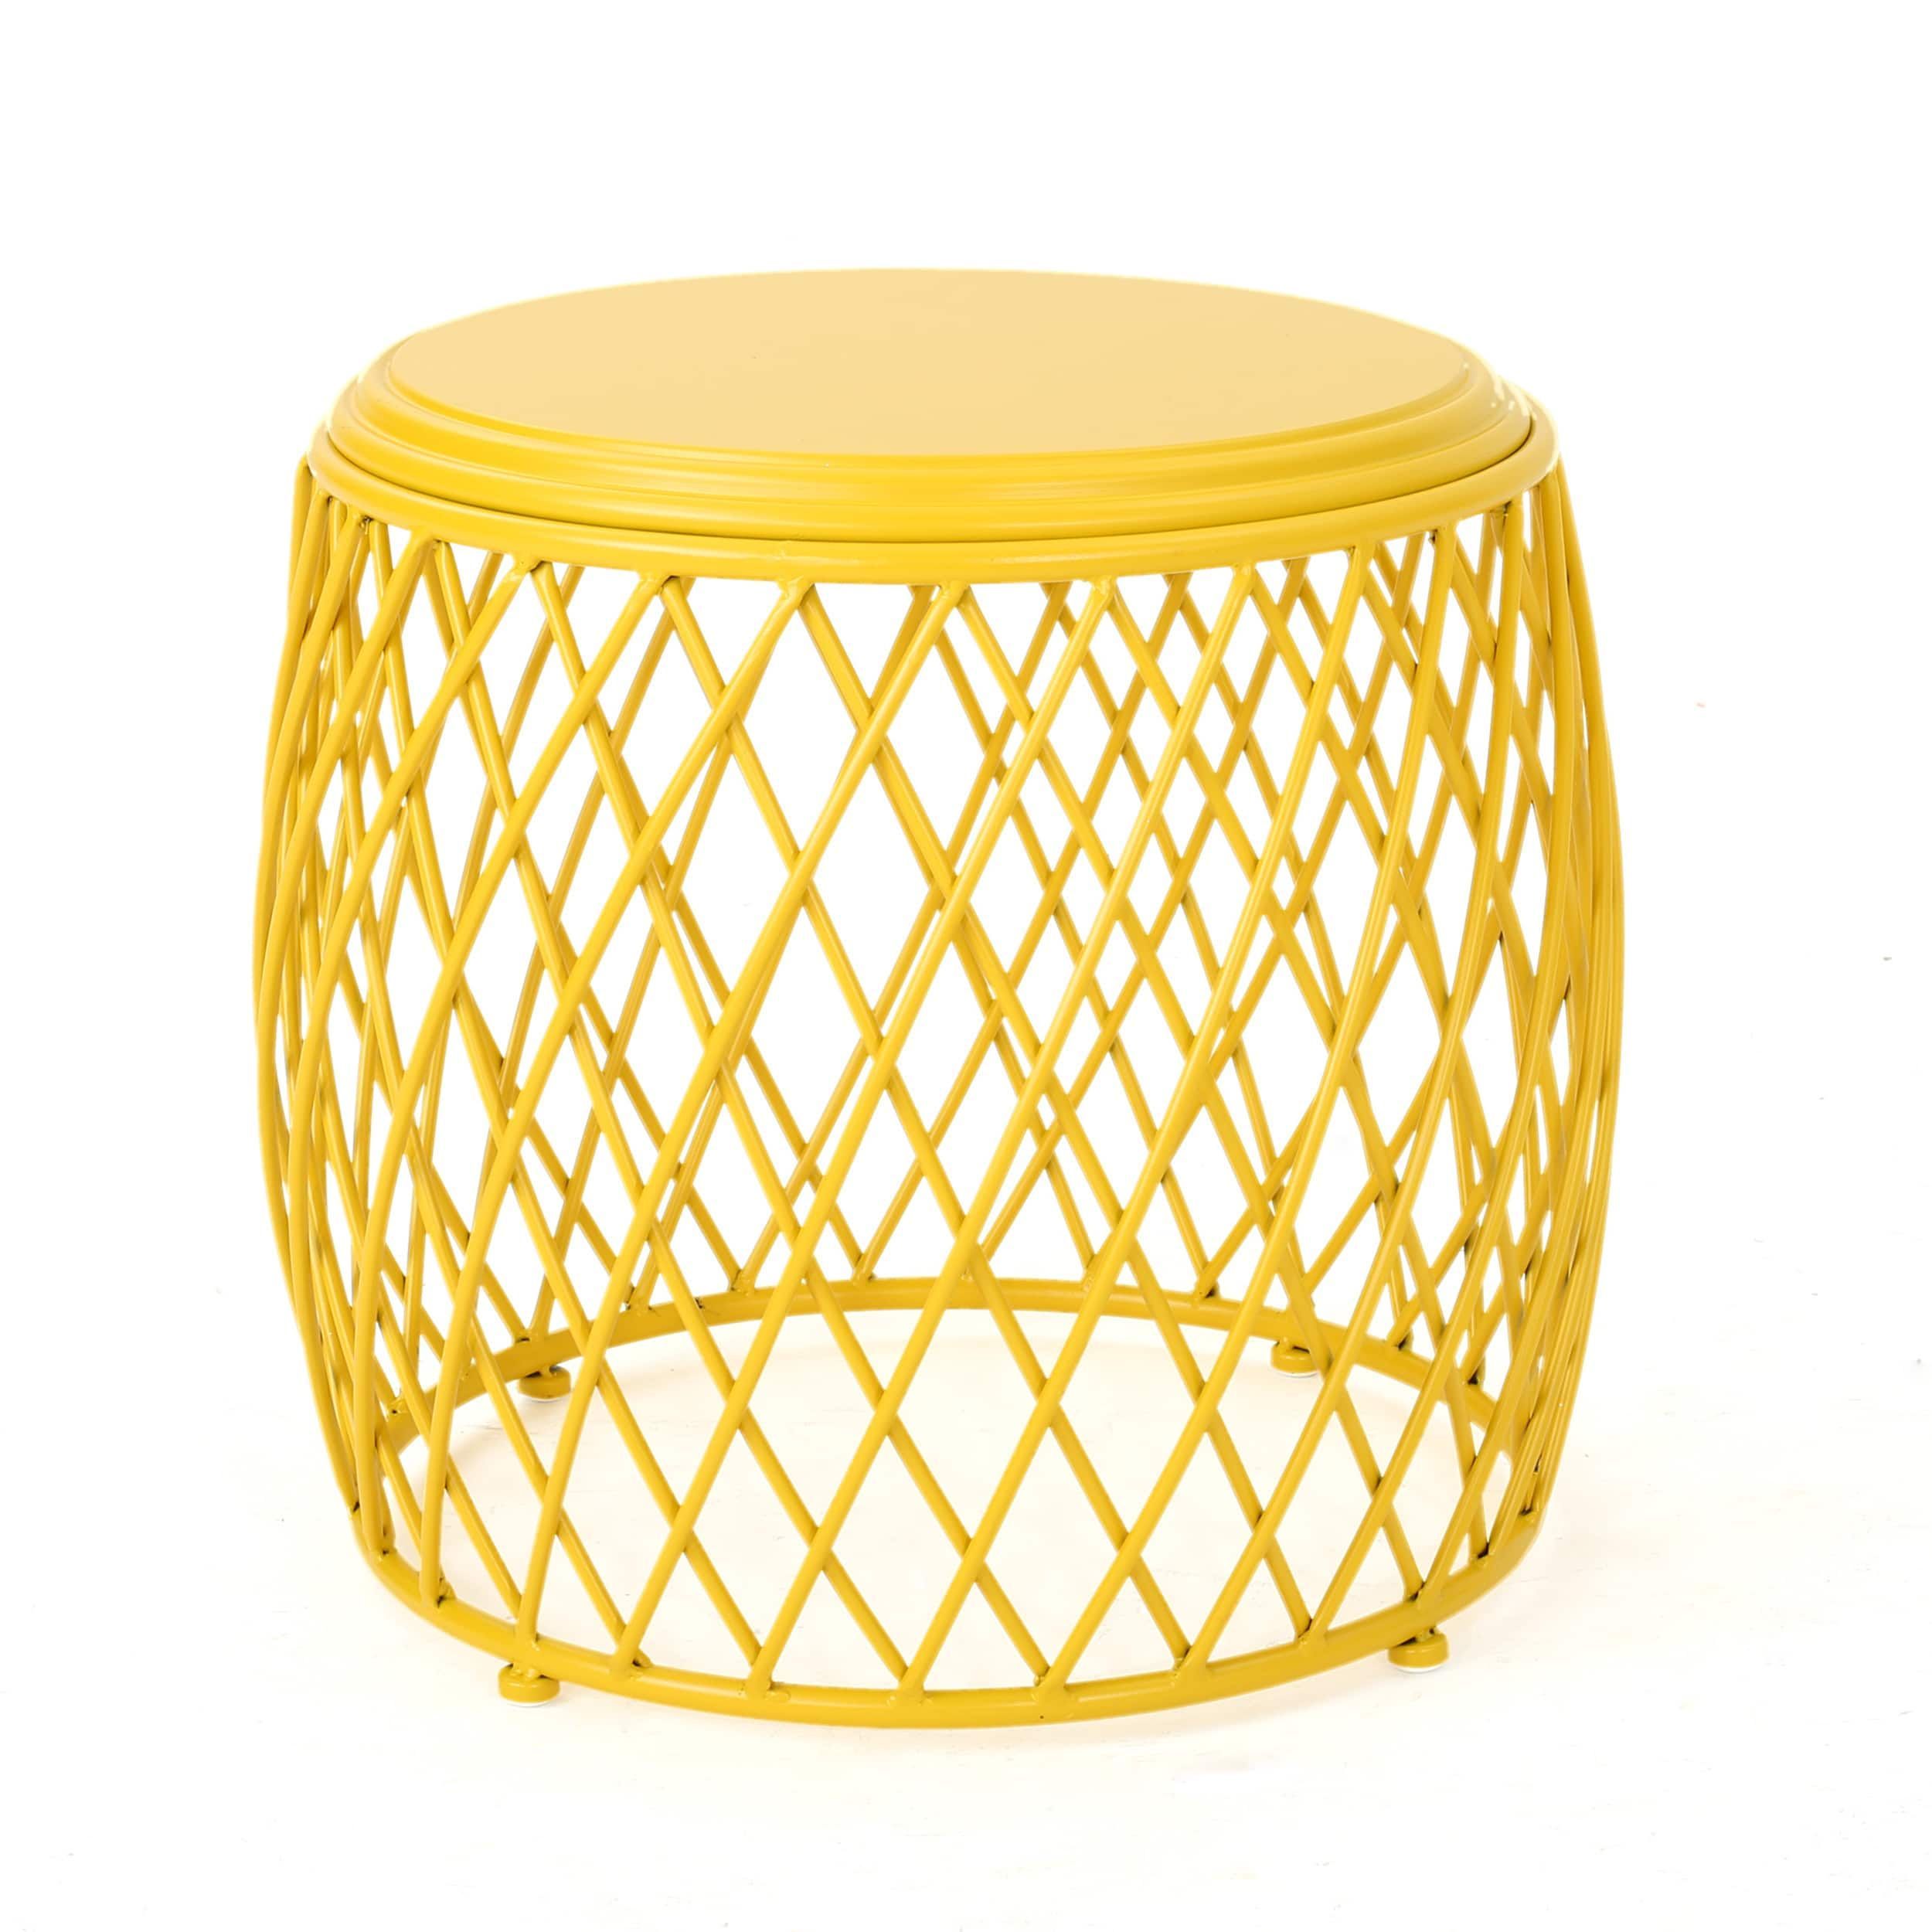 bryony inch round lattice side table christopher knight home outdoor yellow matte green nate berkus marble dining with leaf stanley furniture toddler drum stool floor standing